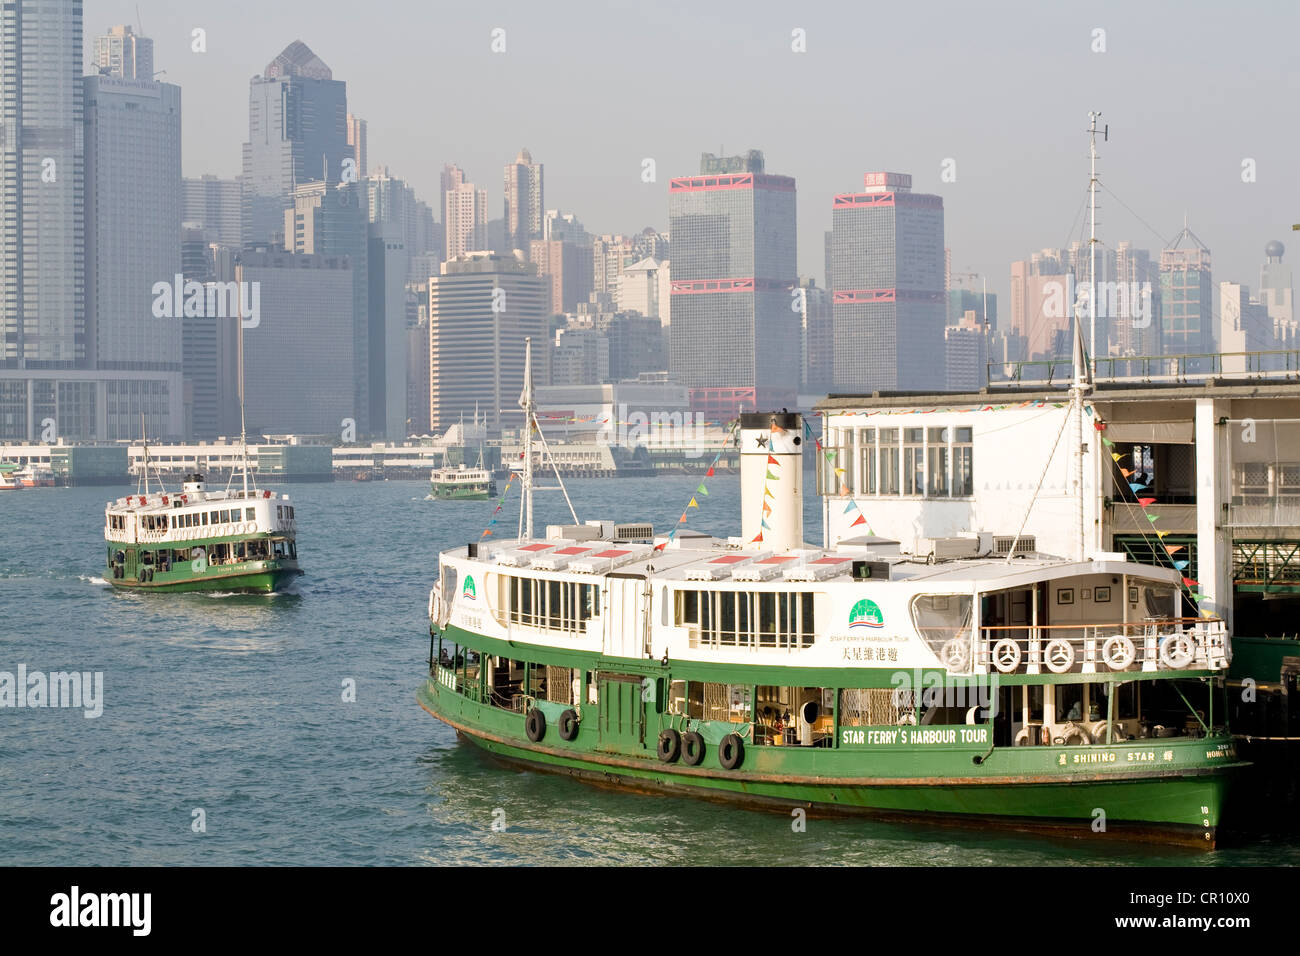 China, Hong Kong, Star Ferry Pier, ferries with Central District in the background Stock Photo